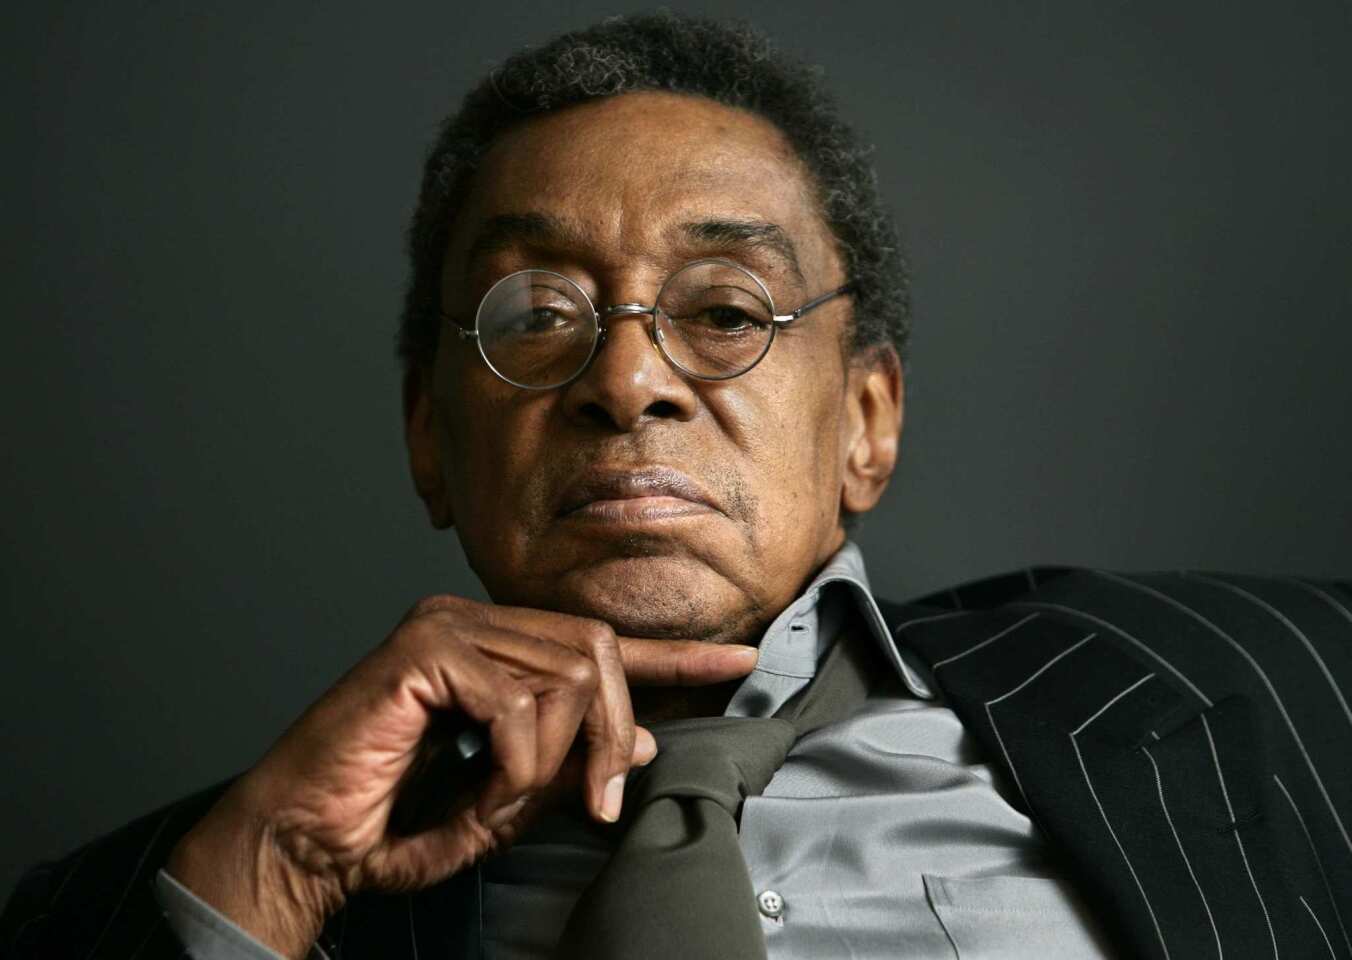 Don Cornelius, the creator and voice of "Soul Train," has died at age 75. Police found the TV icon dead in his home from an apparent self-inflicted gunshot wound. Sources say there were no signs of foul play.